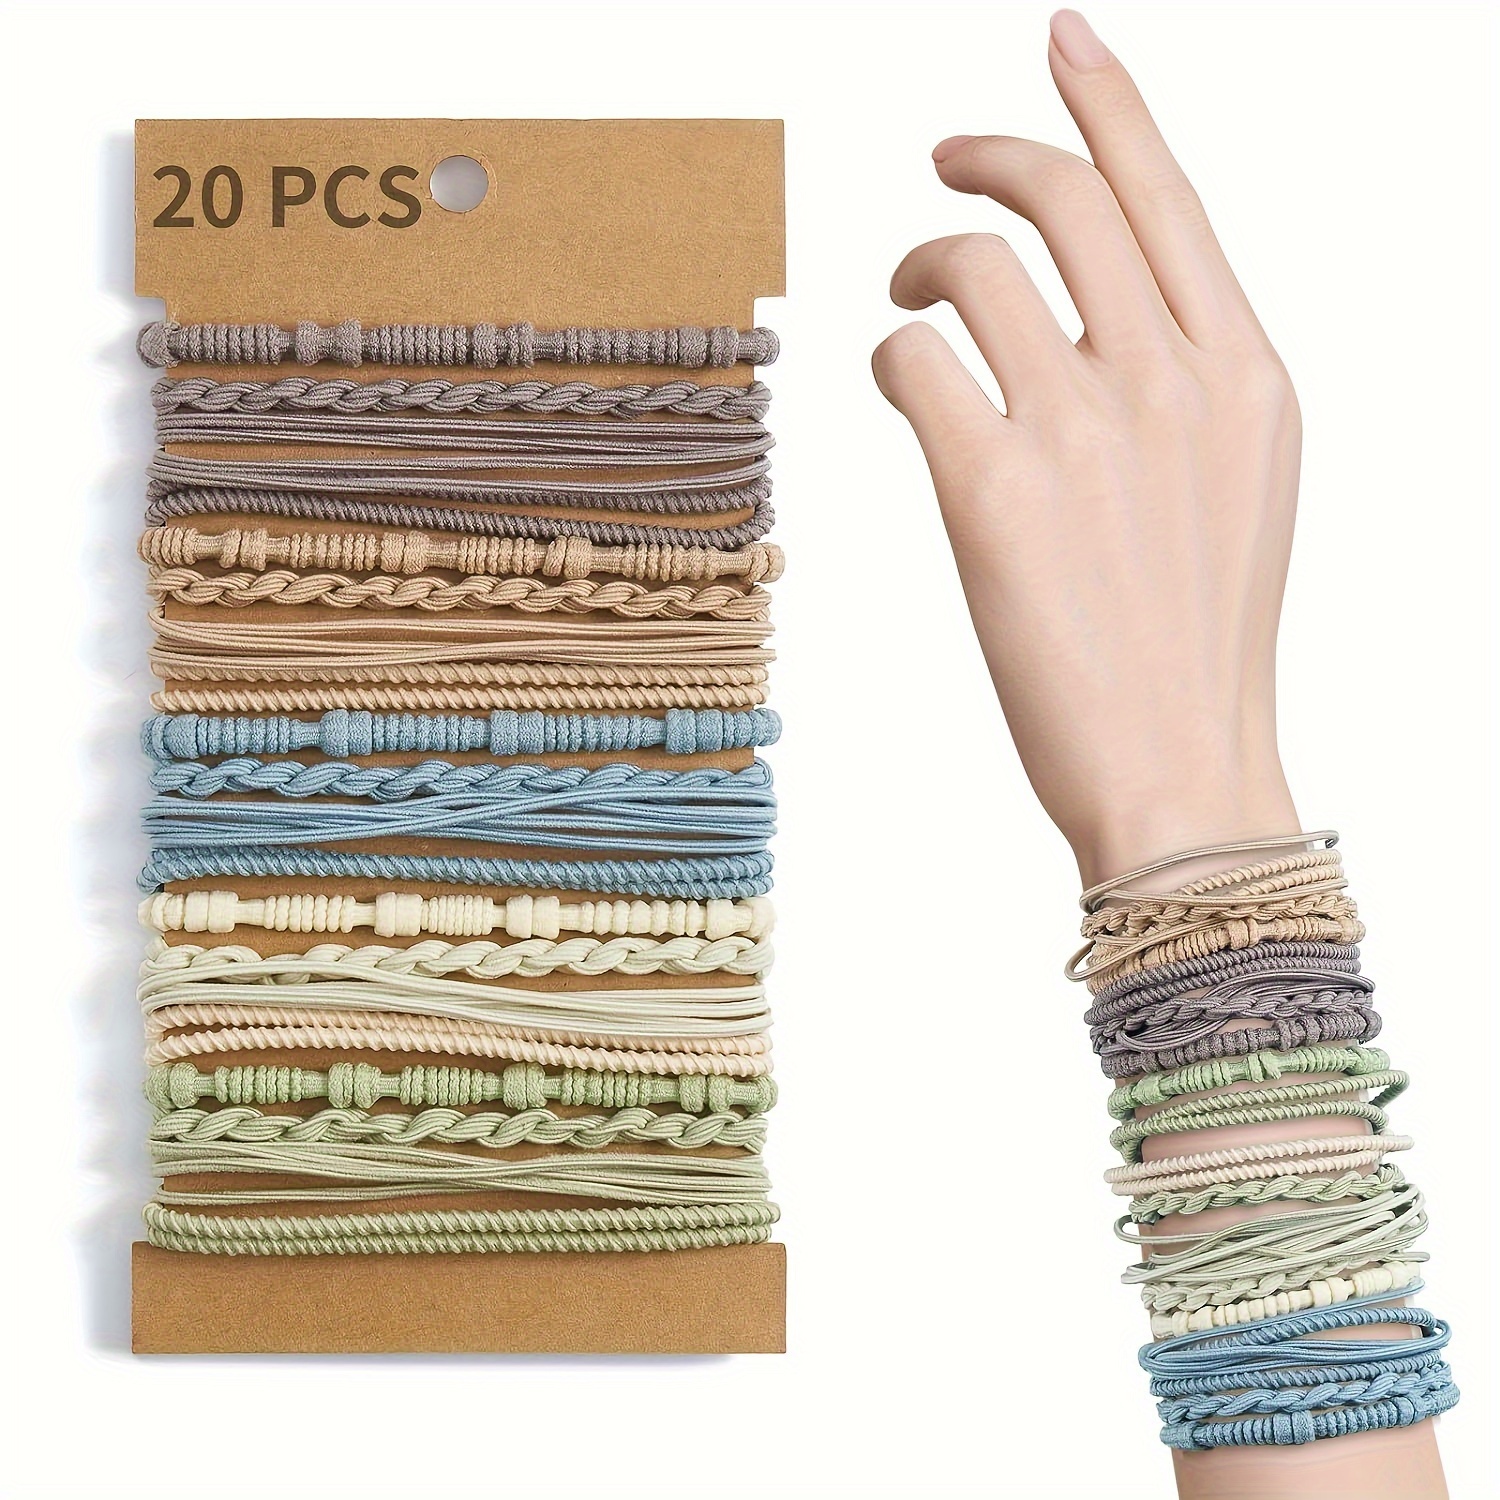 

20 Pcs Stylish Braided Hair Ties For Women - Solid Color Elastic Ponytail Holders For Thick And Curly Hair